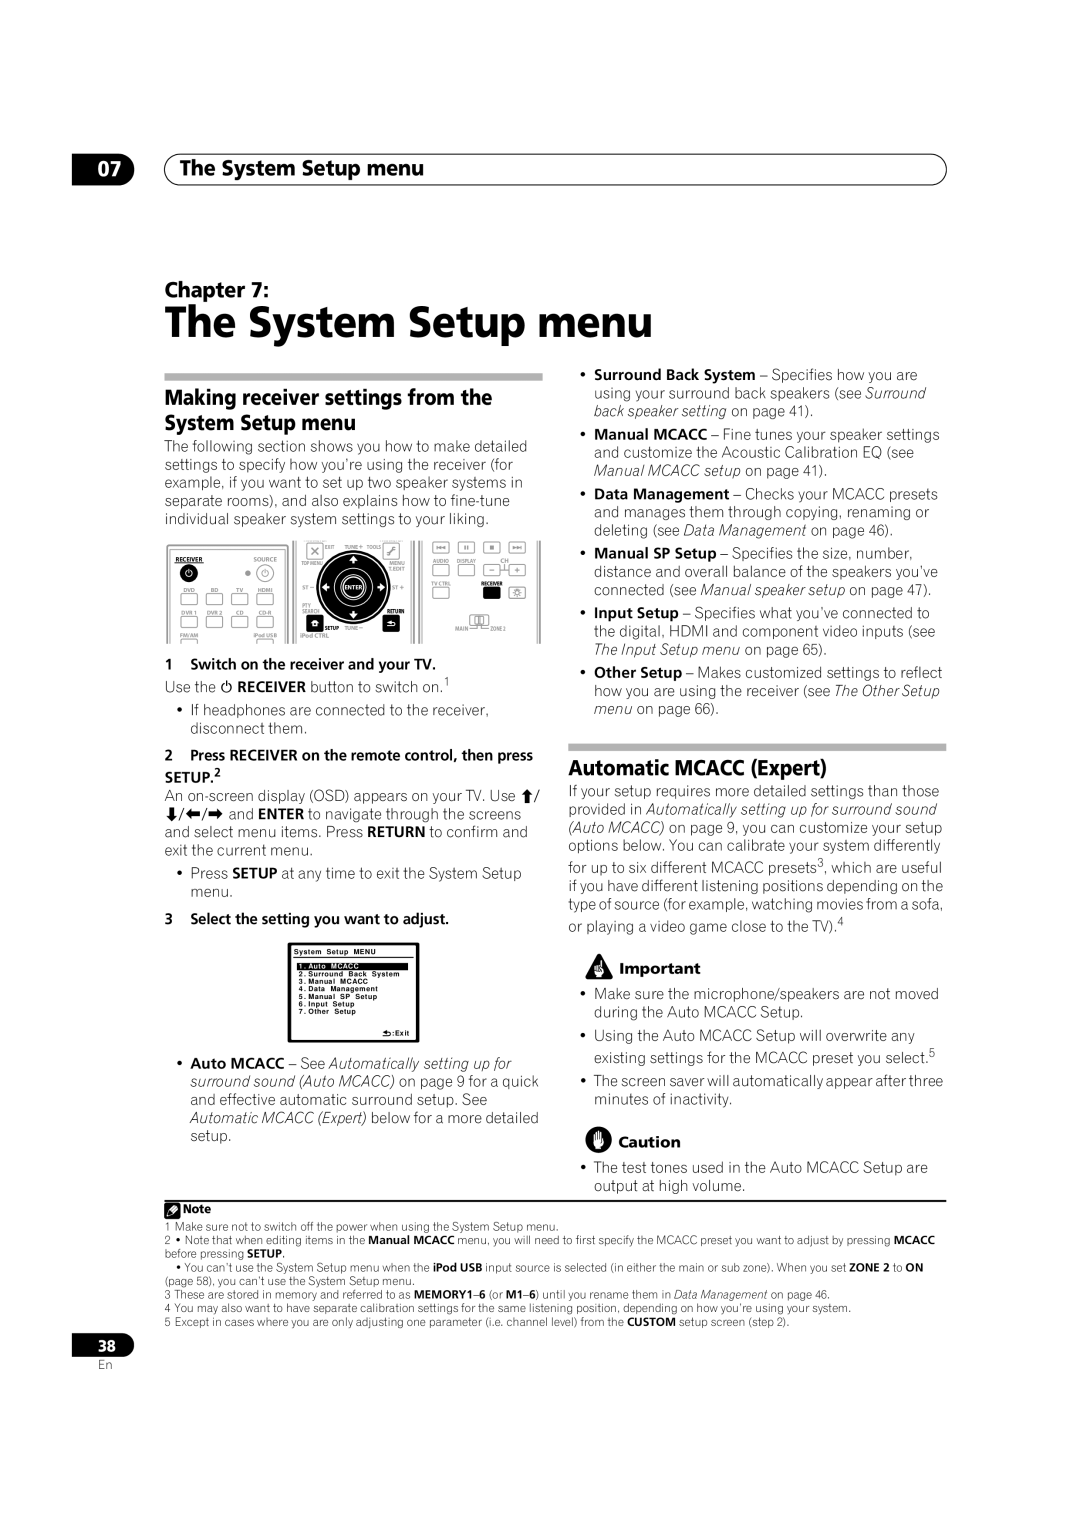 Pioneer VSX-LX51 manual 07The System Setup menu Chapter, Automatic MCACC Expert 